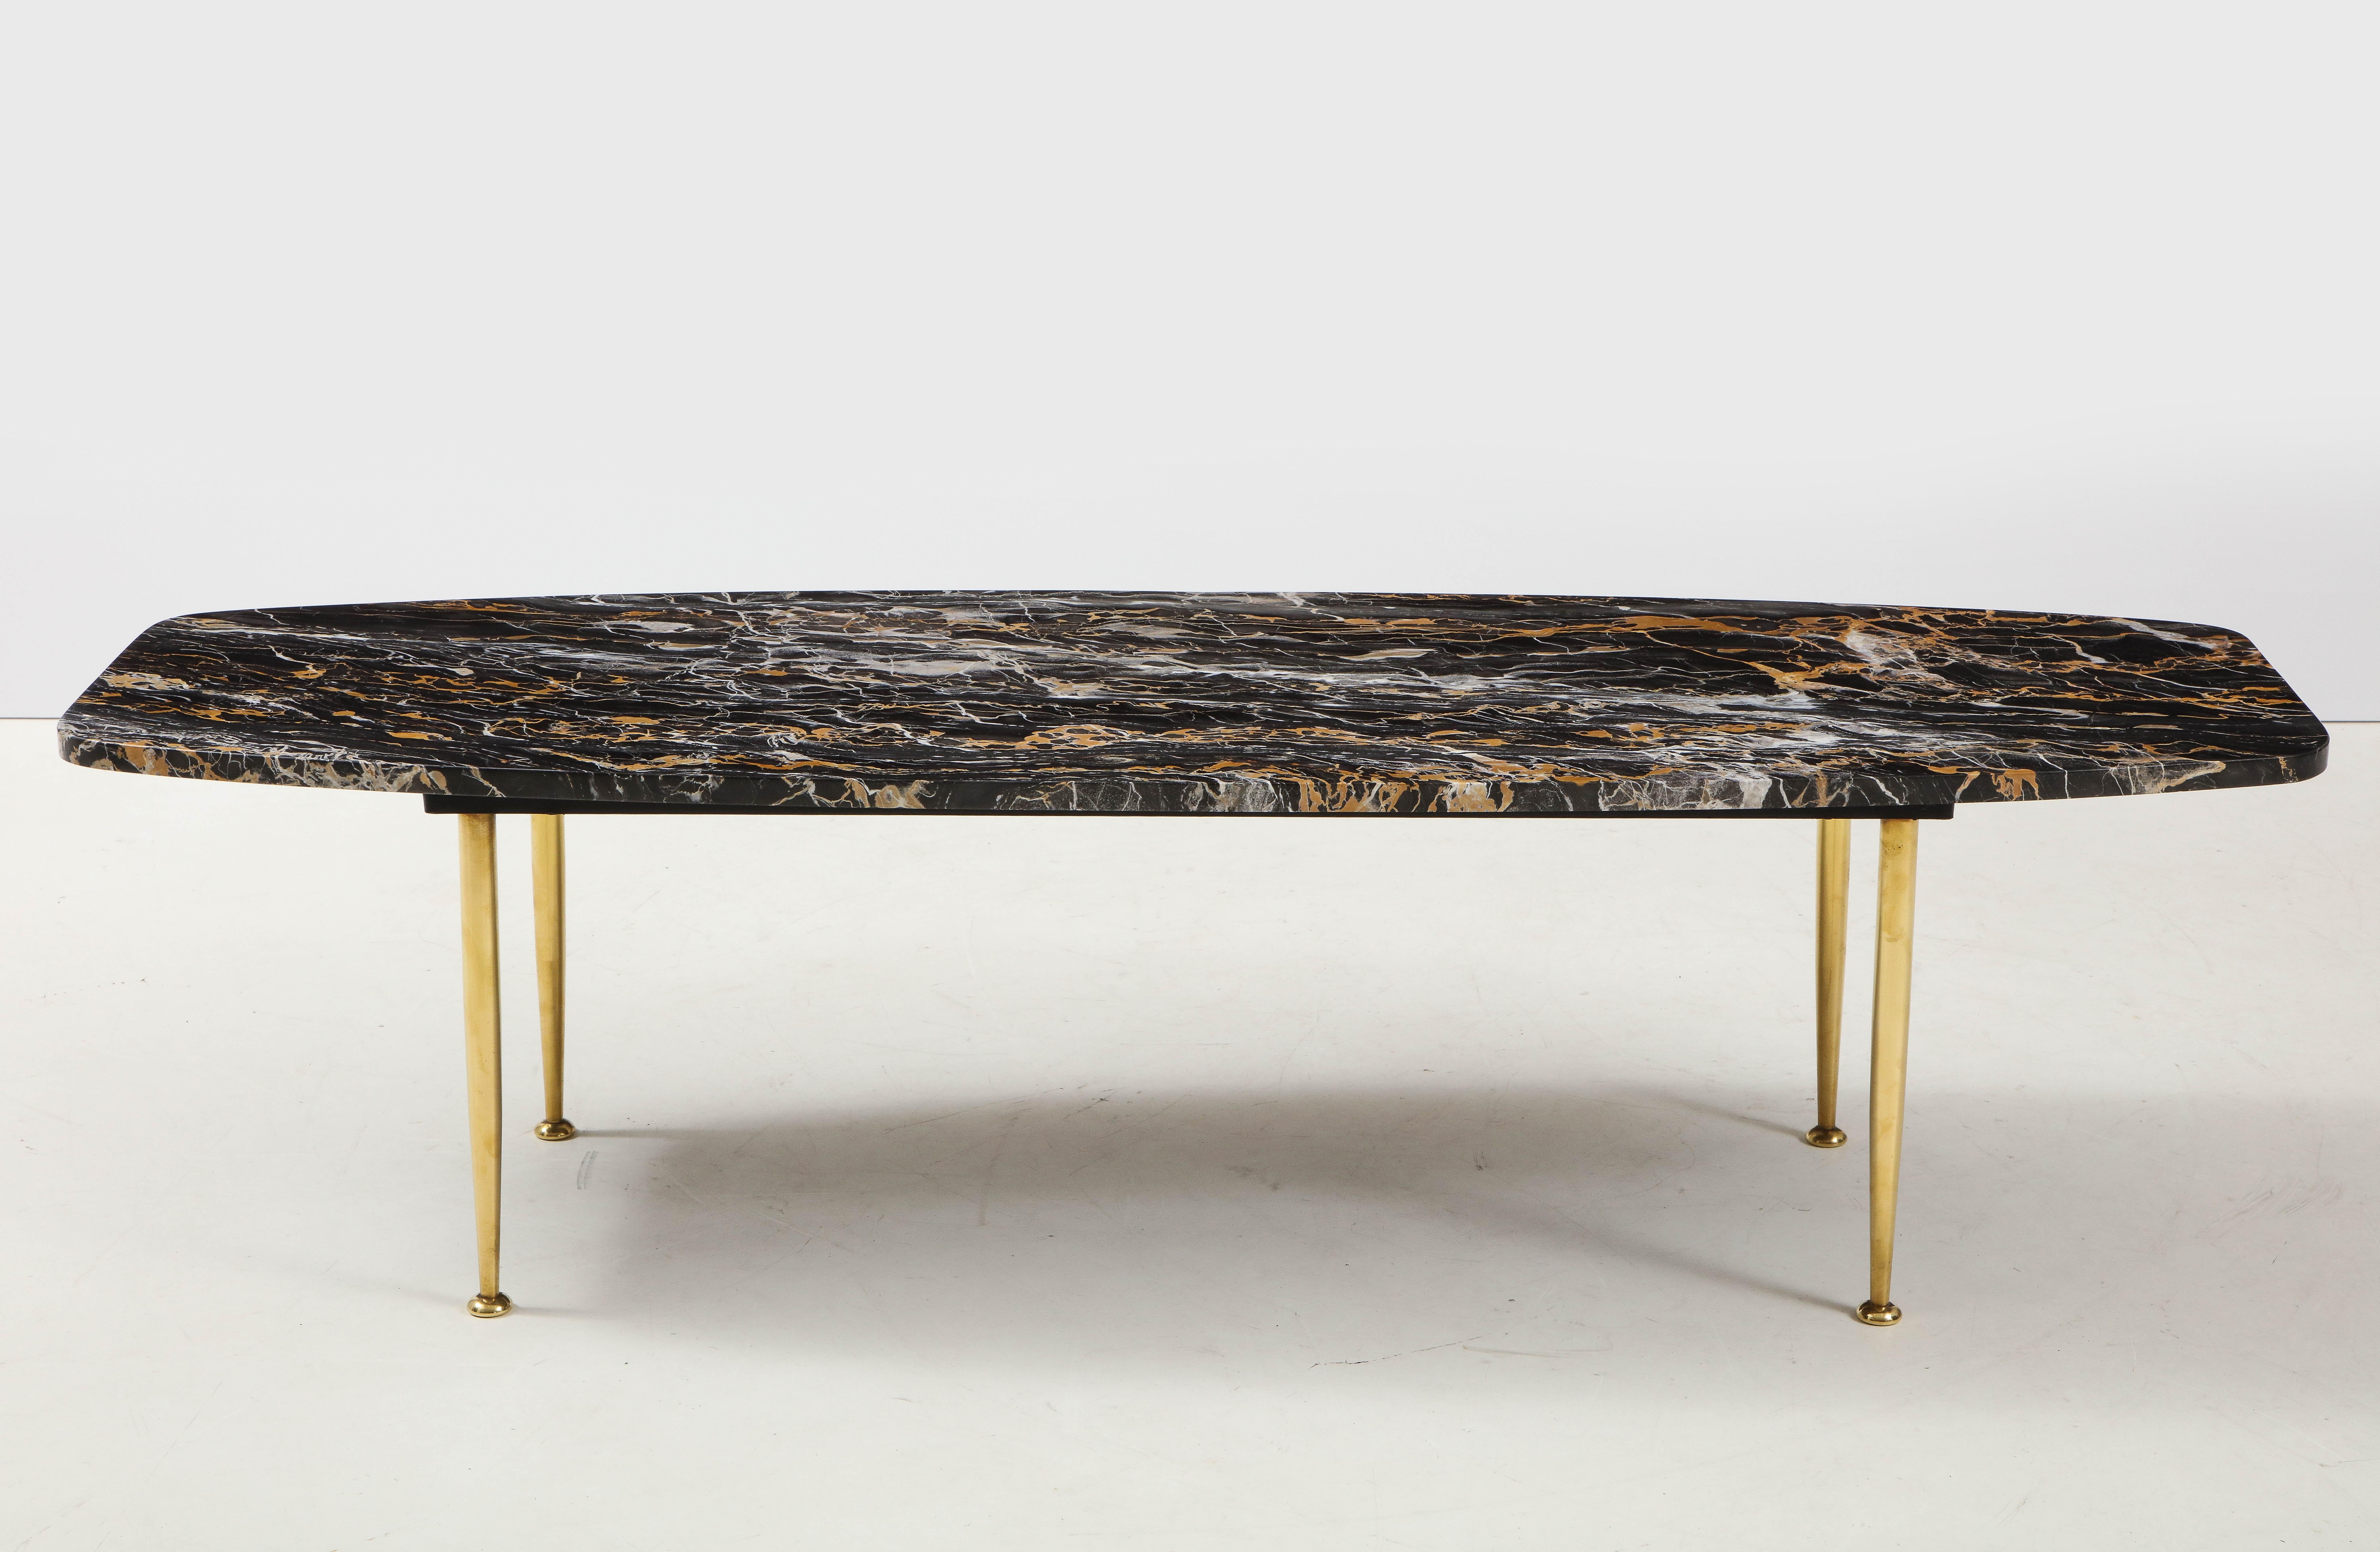 Stunning 1950s Mid-Century Modern exotic marble top with tapered brass legs Italian coffee table. In vintage condition the legs have been lightly hand polished.